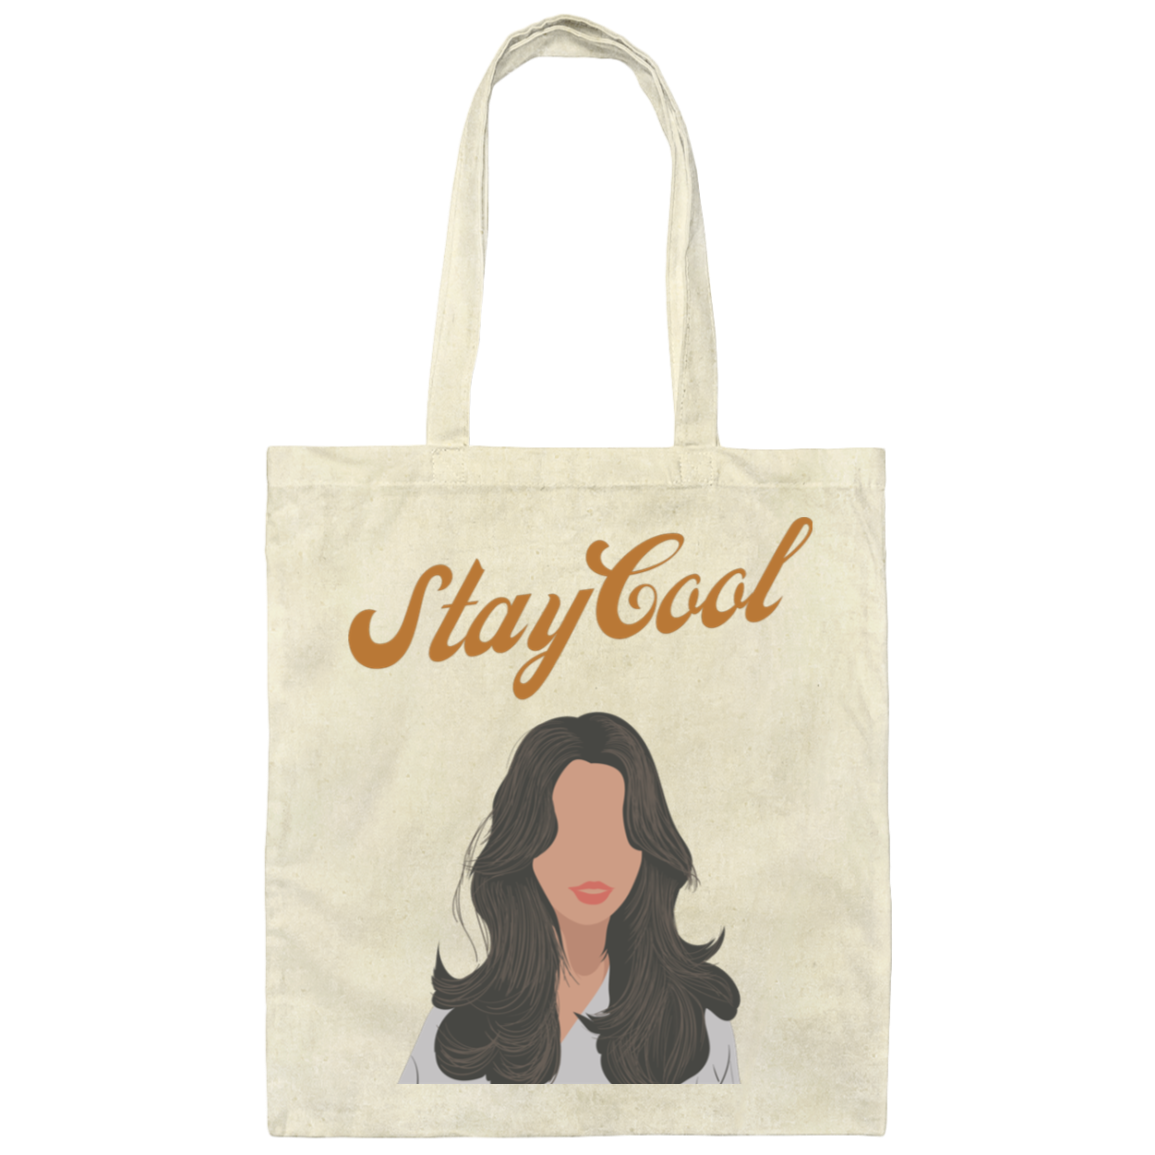 Stay Cool Canvas Tote Bag